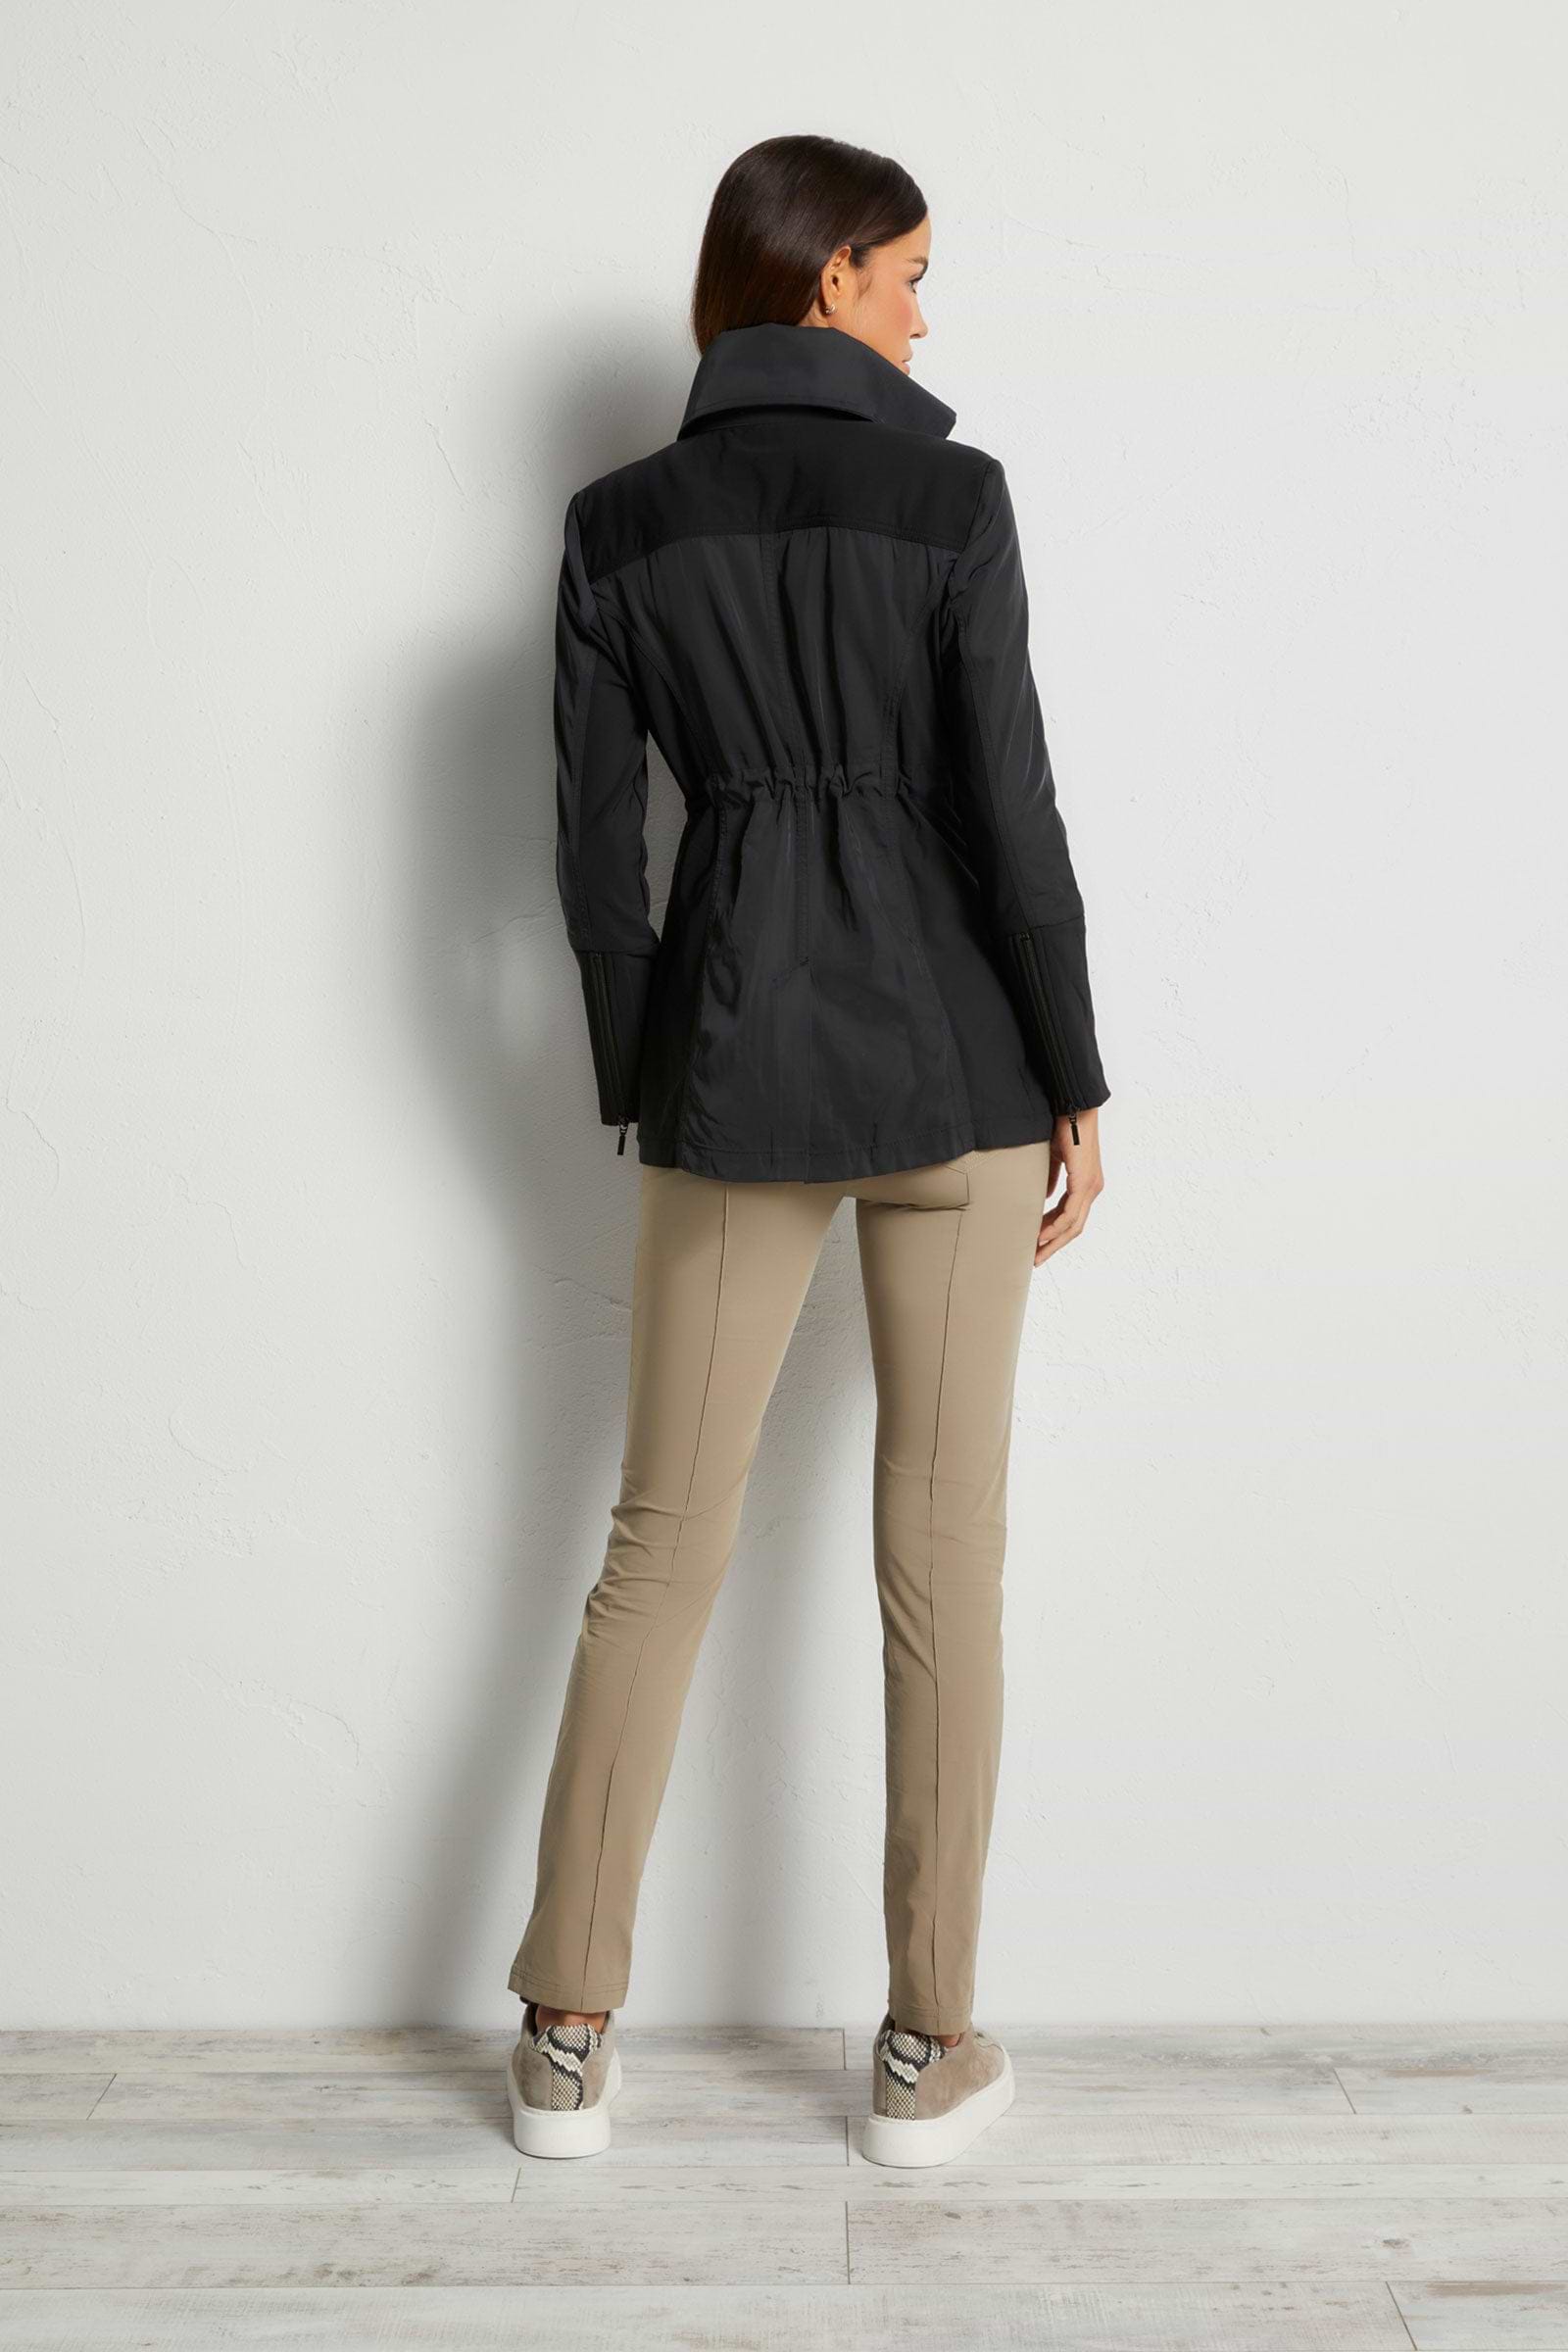 The Best Travel Jacket. Woman Showing the Back Profile of a Travel City Slick Jacket in Black